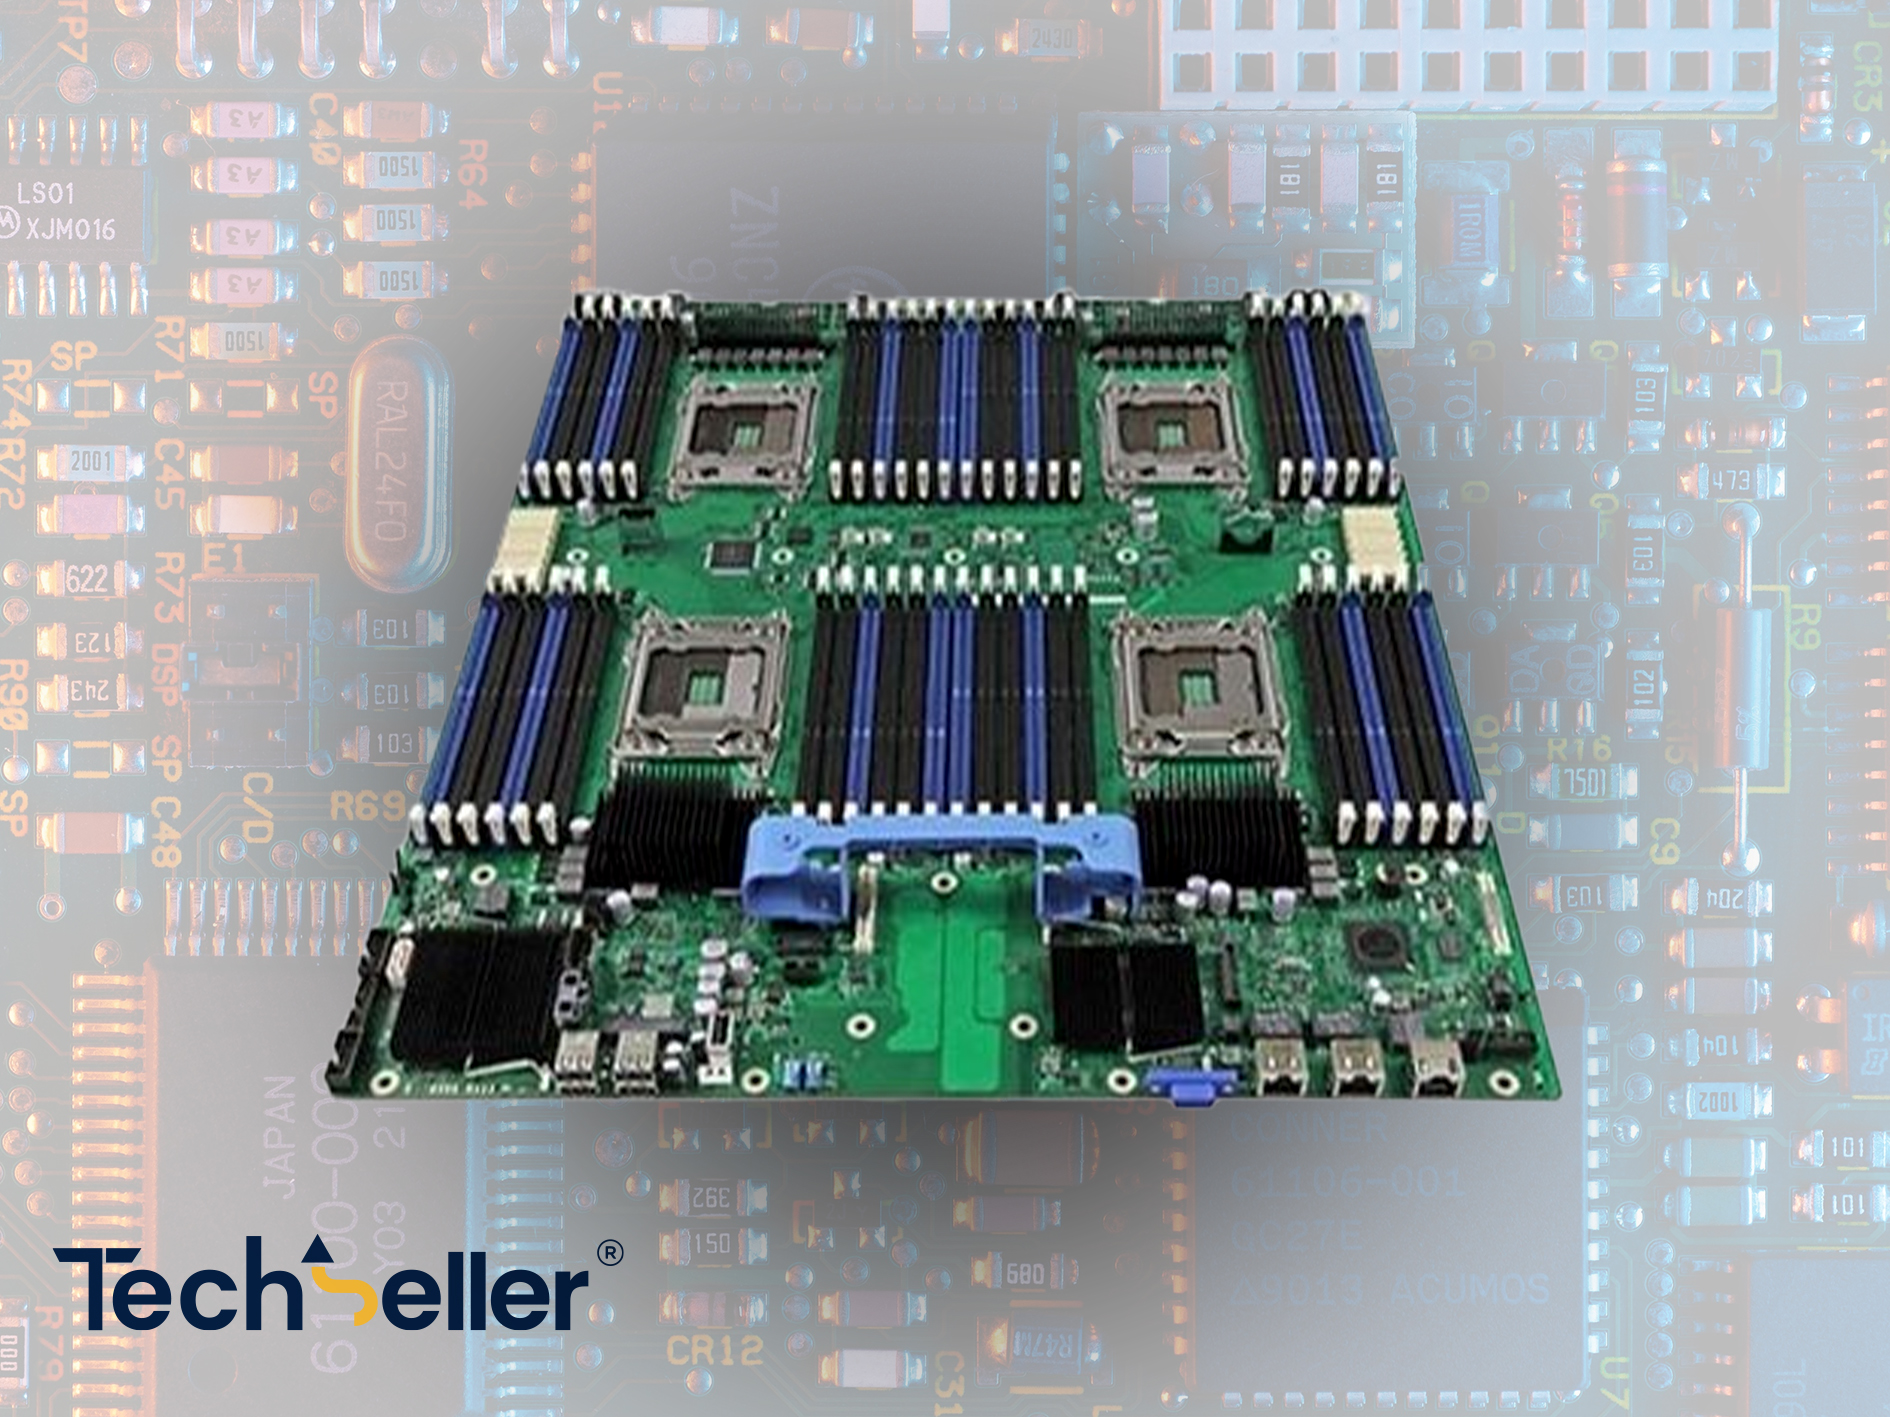 Unleashing Excellence CN7X8 Motherboard Overview